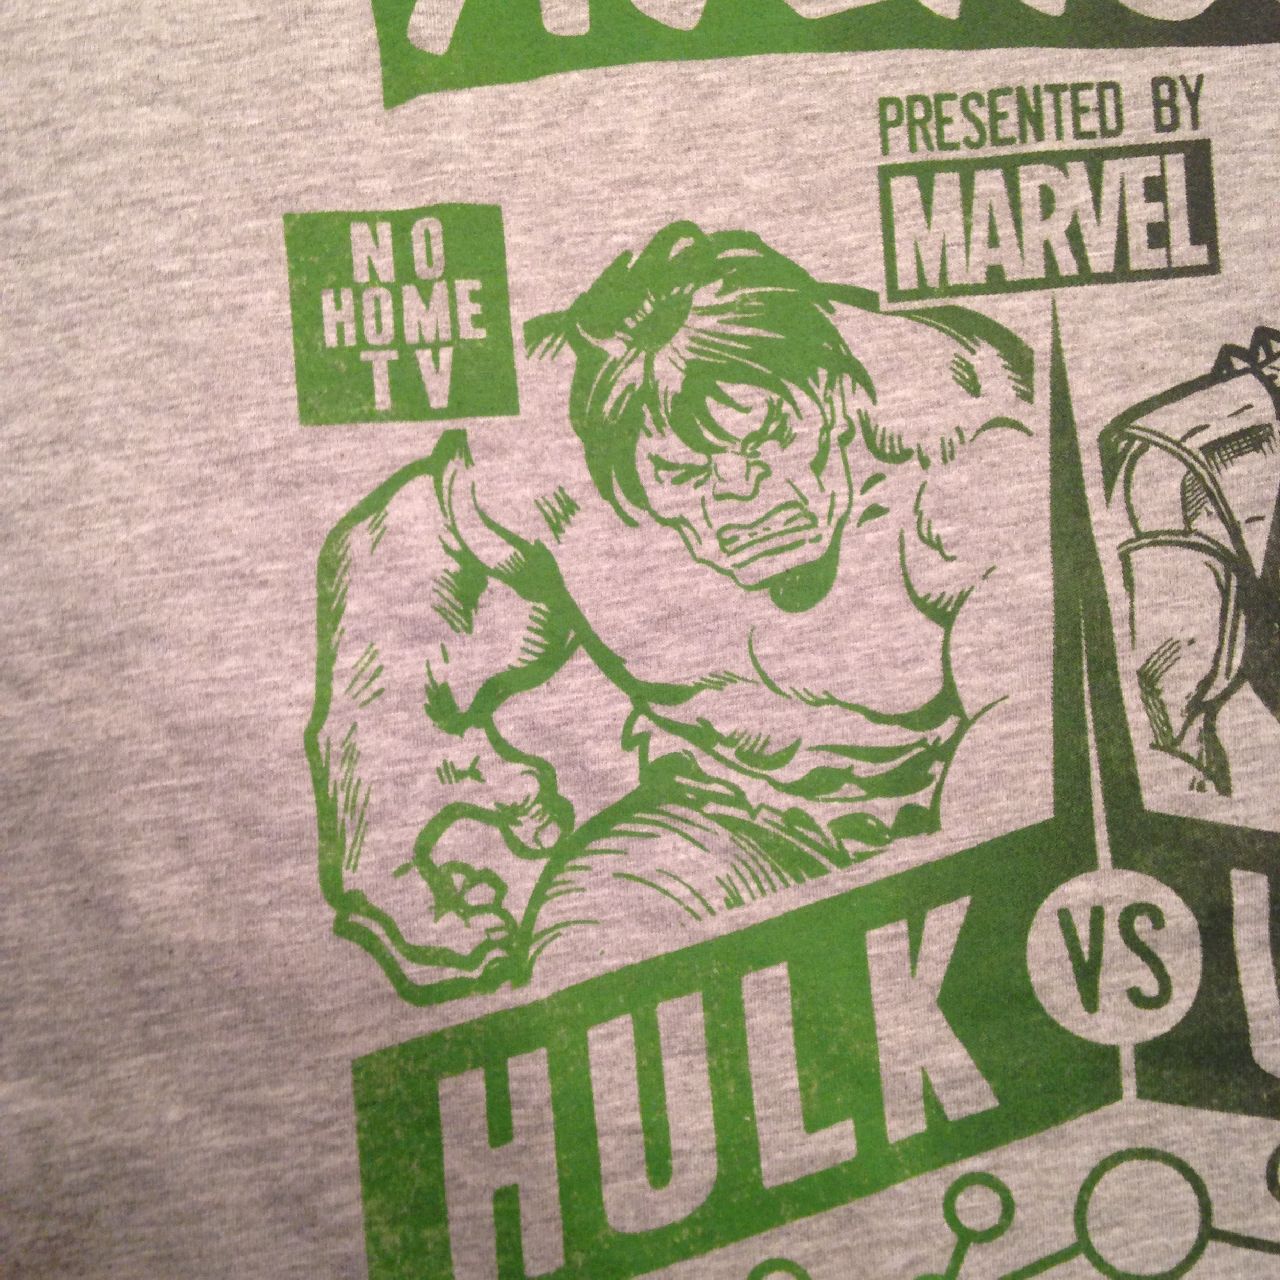 Marvel Collector Corps April Box T-Shirt